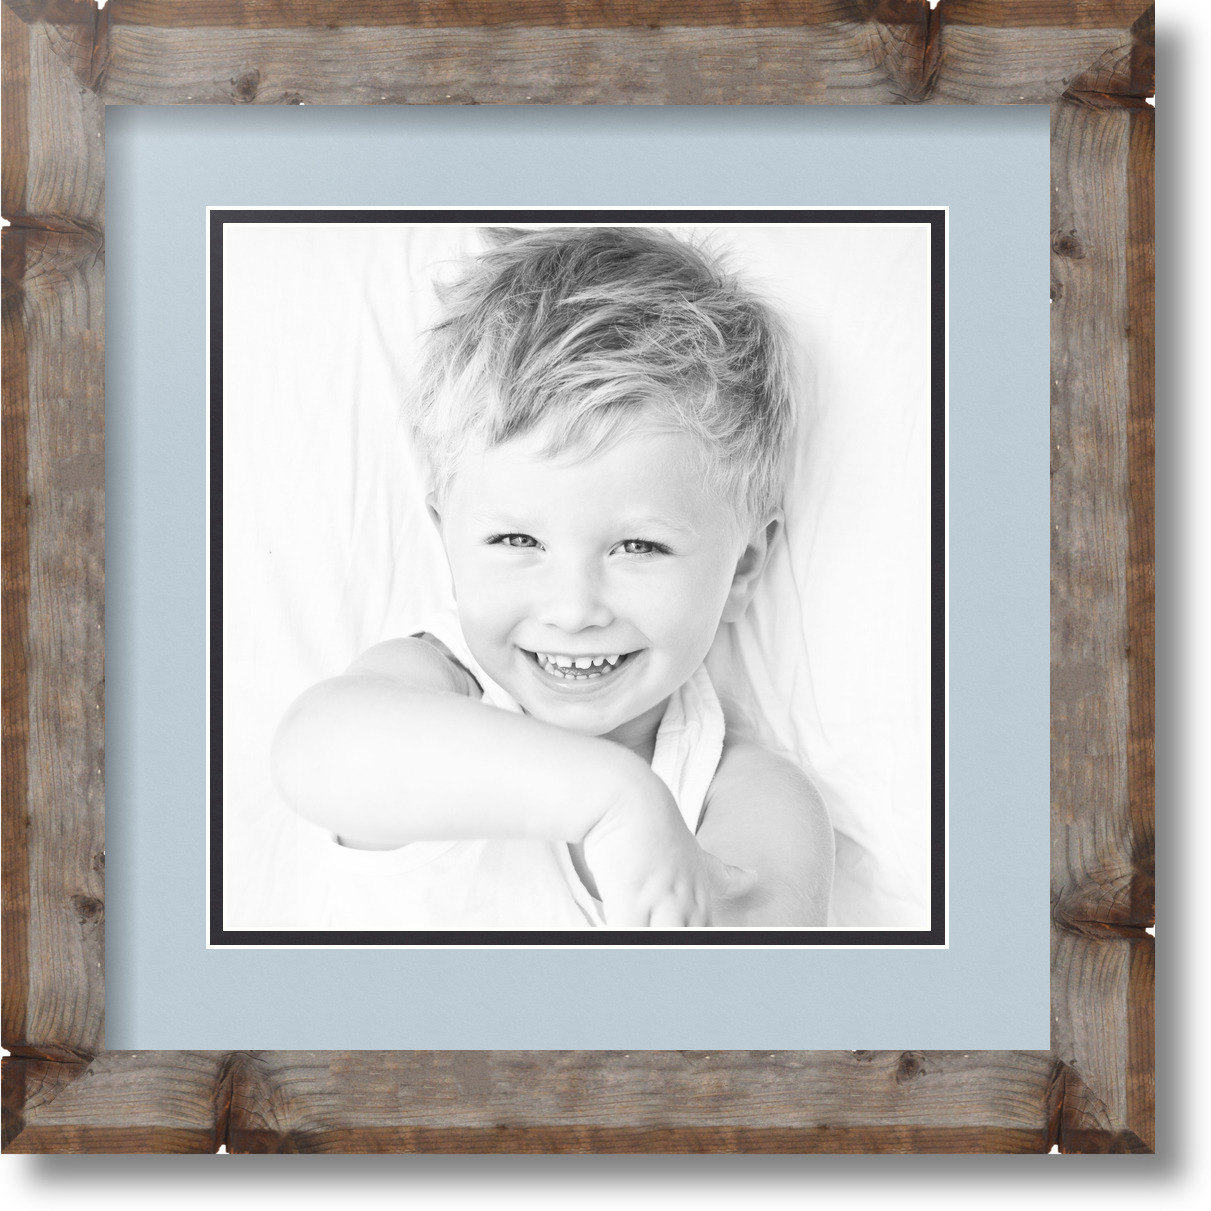 10x10 Opening ArtToFrames Matted 14x14 Black Picture Frame with 2" Double Mat 